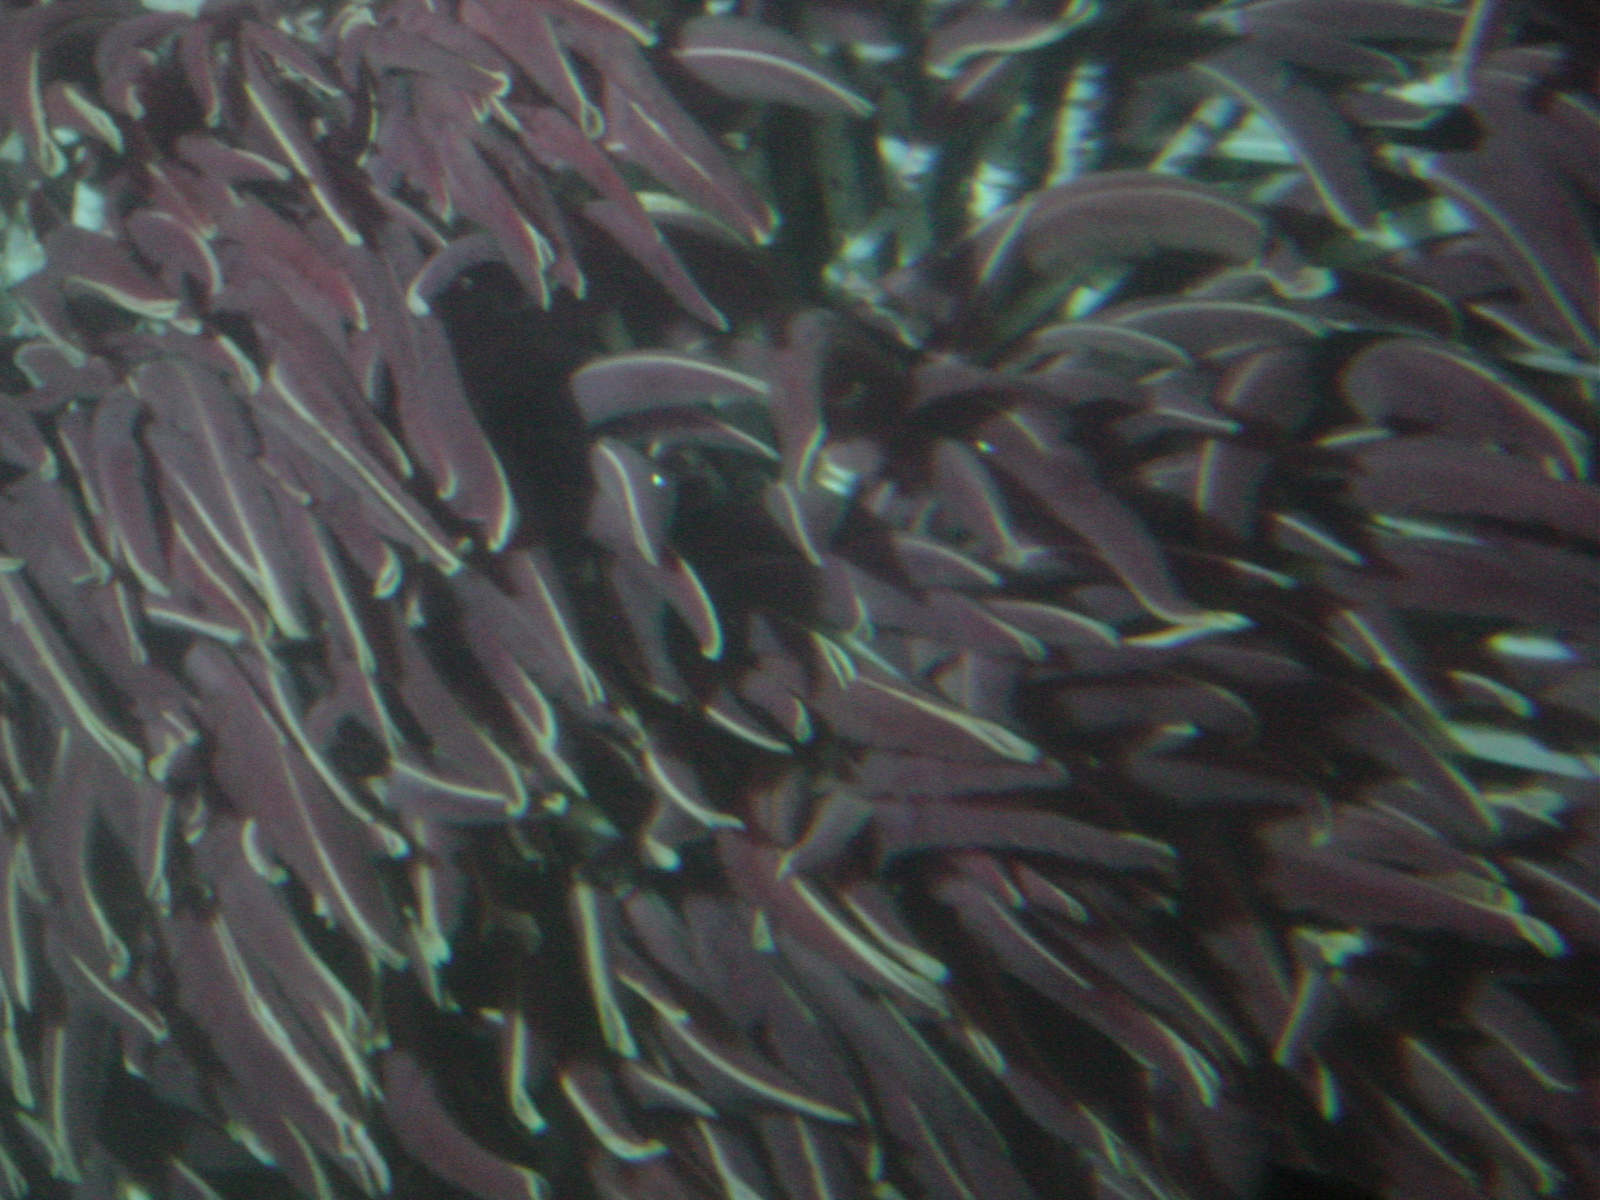 X-life 2003 075 is an image of tube worms on the Guaymas vent field that I took through the porthole of the sub. 